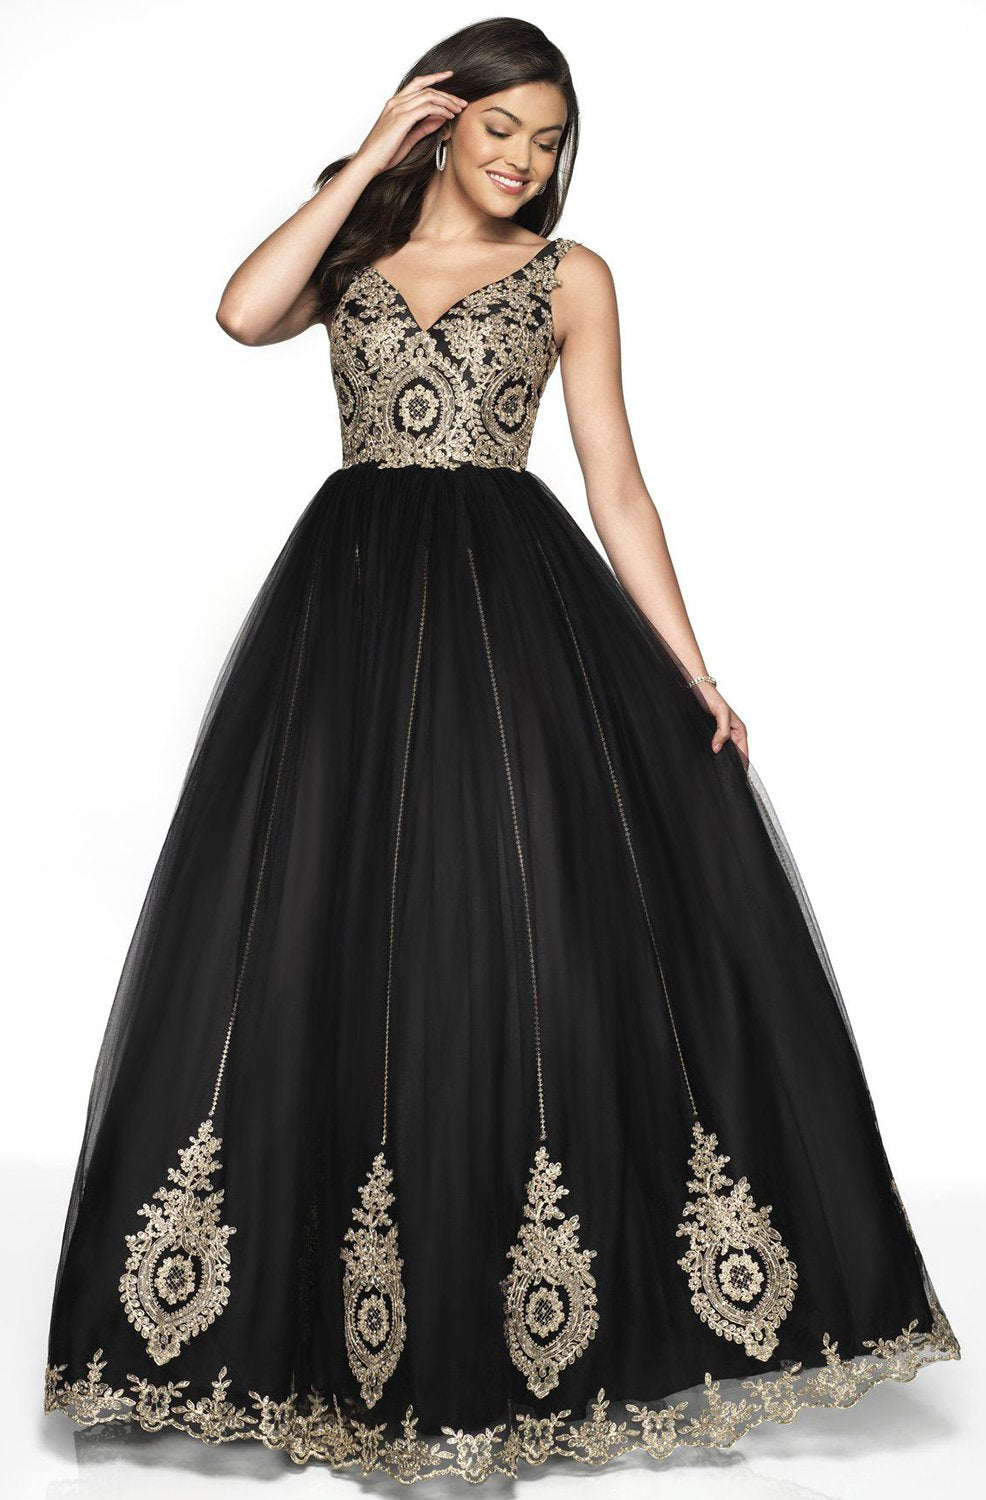 Blush by Alexia Designs - 5710 Metallic Lace V-neck Tulle Ballgown In Black and Gold